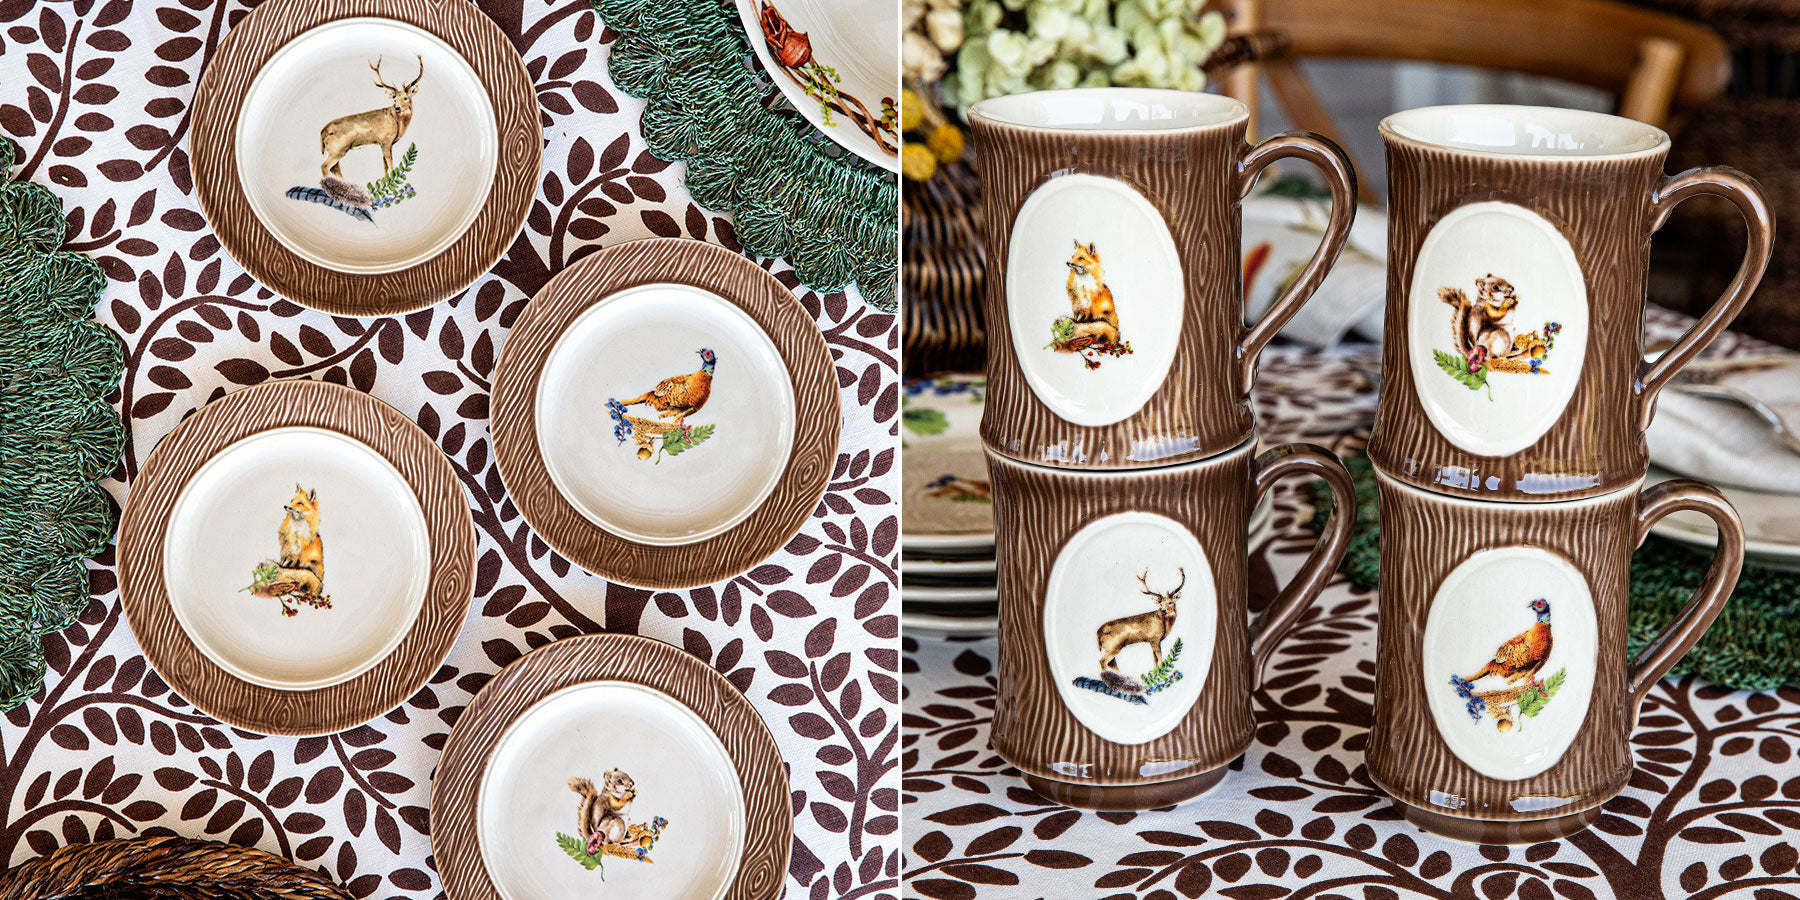 Forest walk plates and mugs